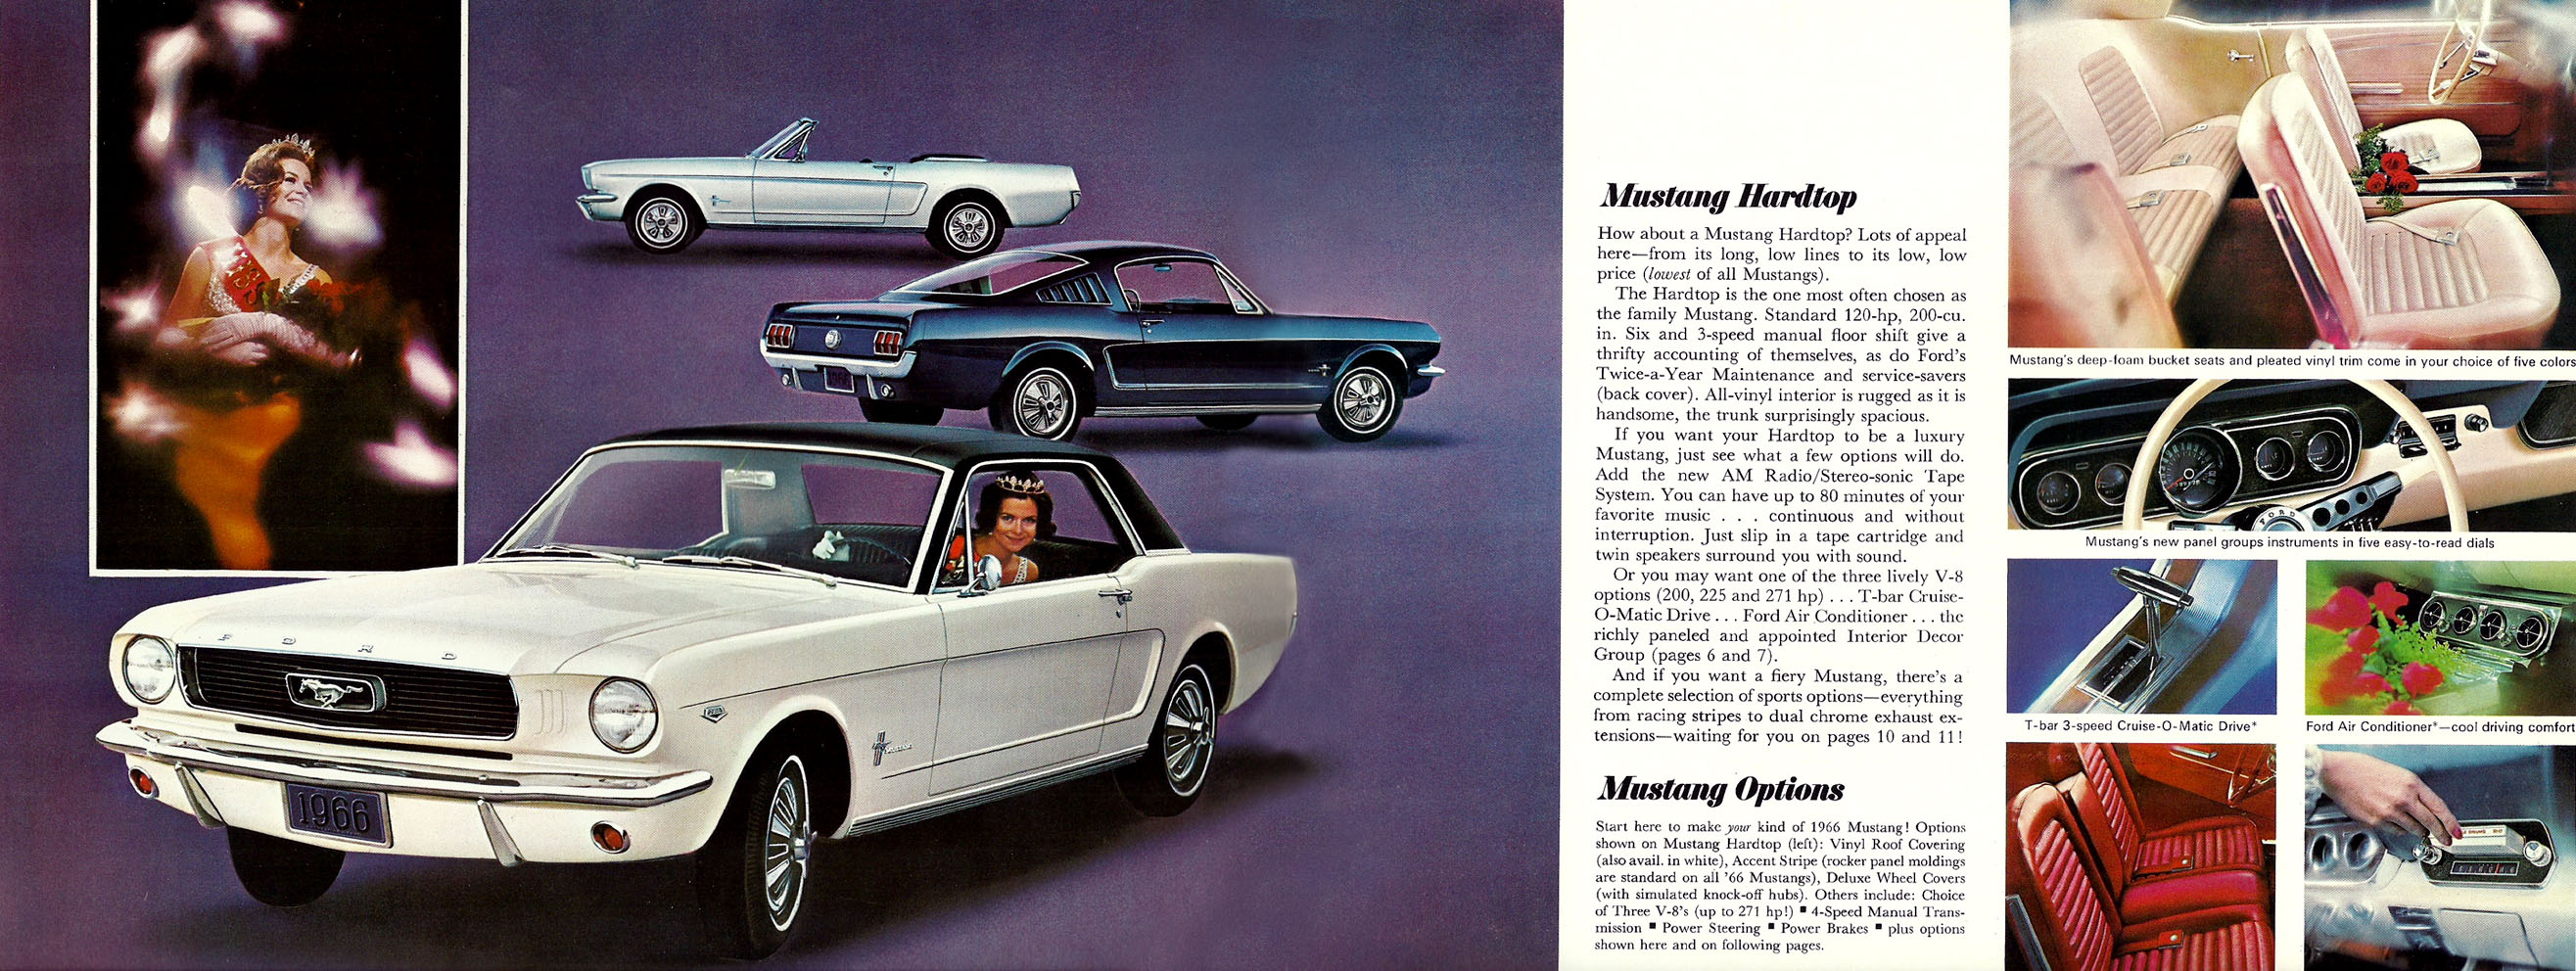 1966 Ford Mustang Brochure Page 3